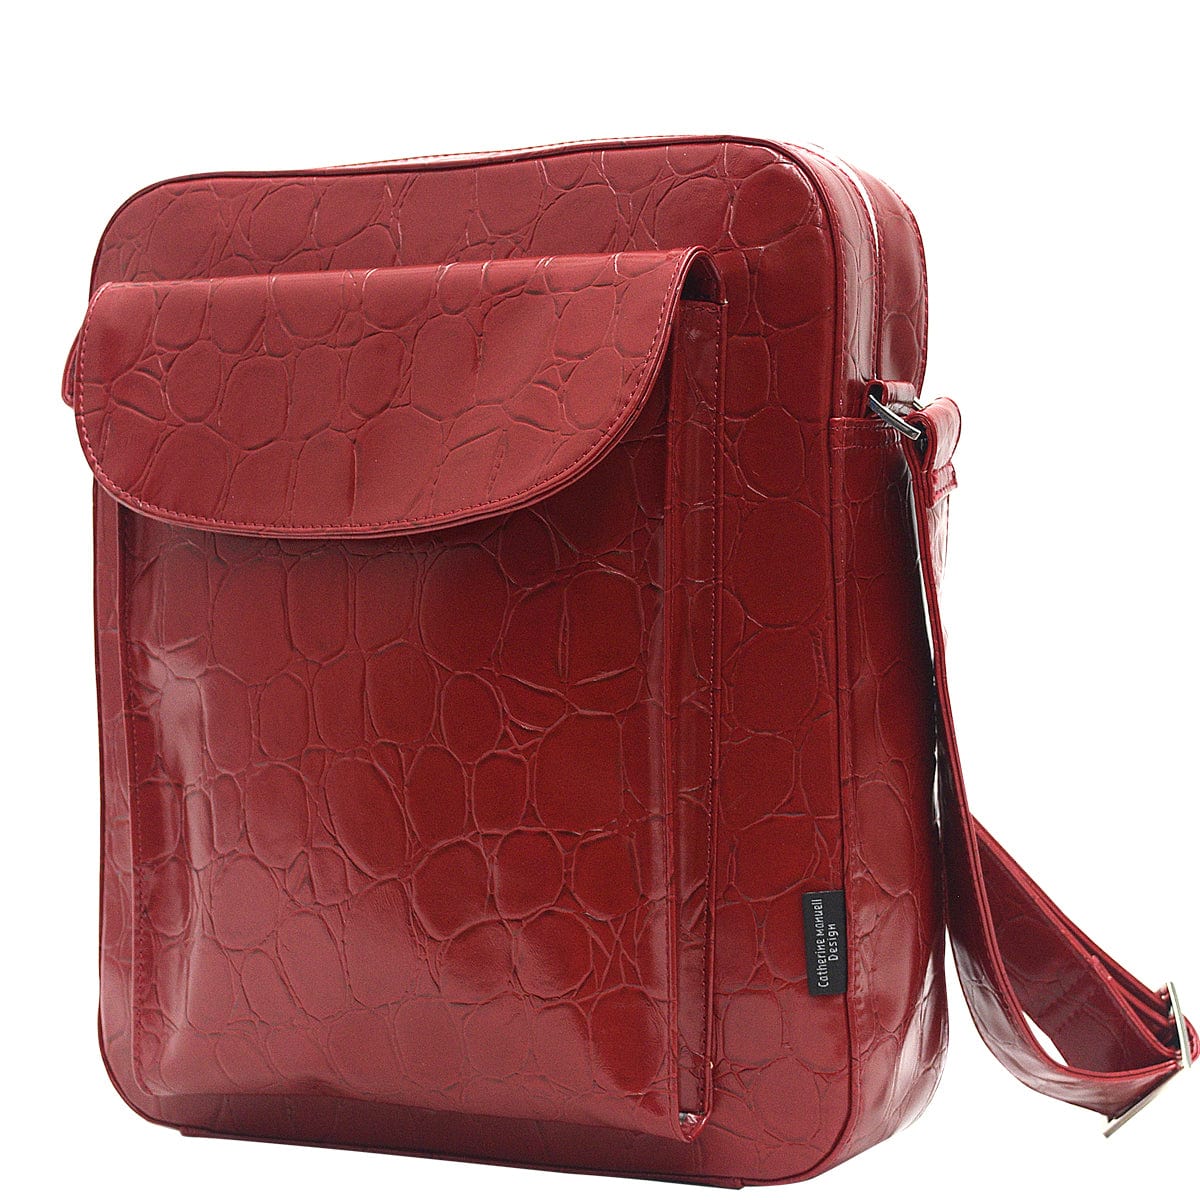 Canal Street Bag - Large Red Croc